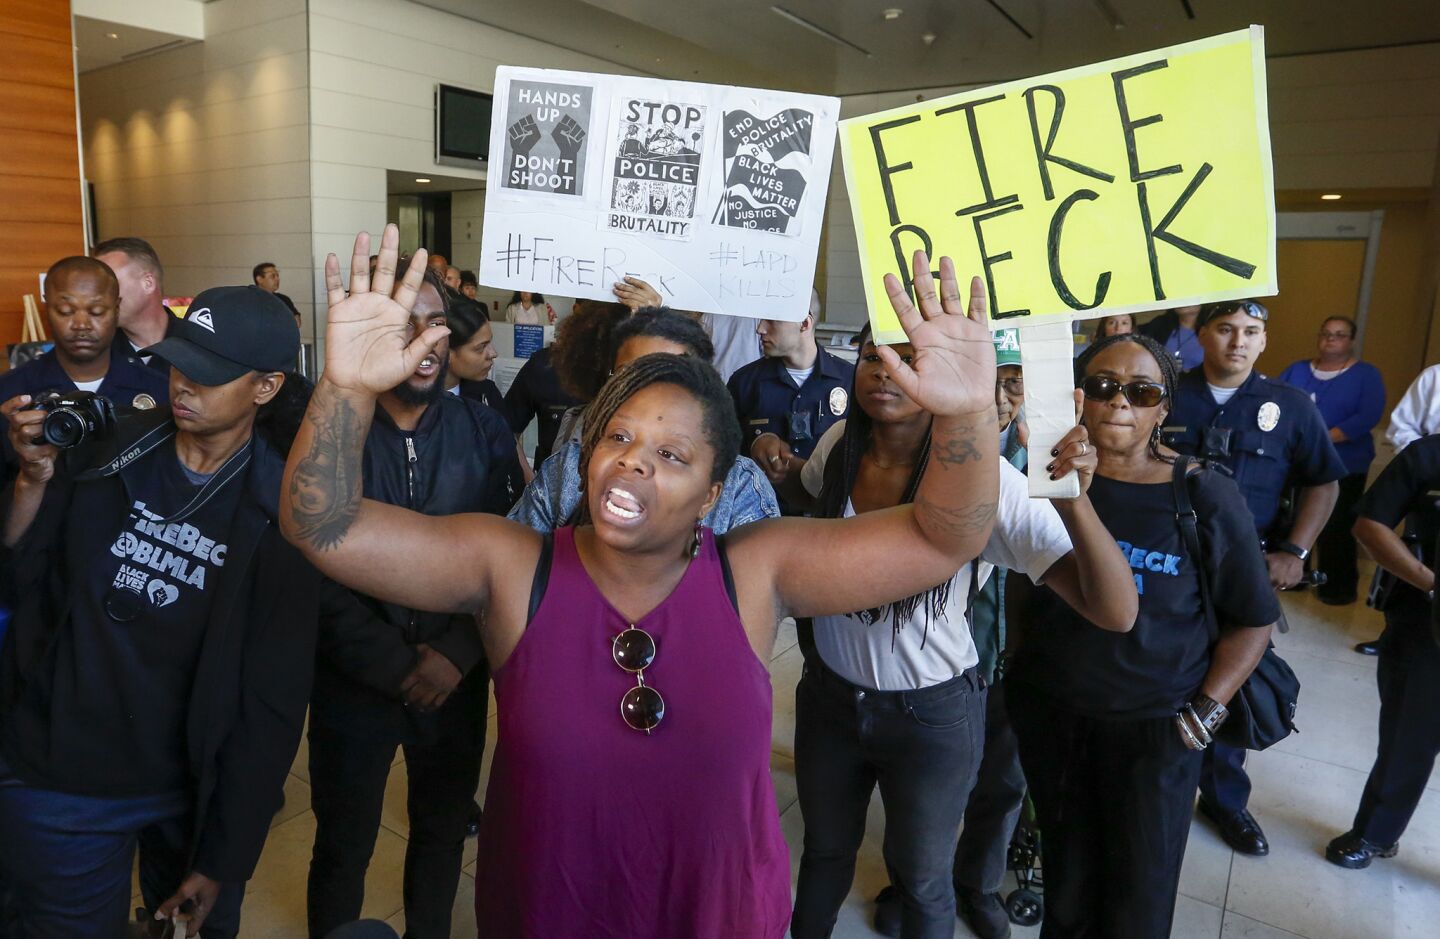 Protesters shout out their messege inside the lobby of LAPD headquarters after Police Chief Charlie Beck gave details to the media about the officer-involved shooting death of Carnell Snell Jr.